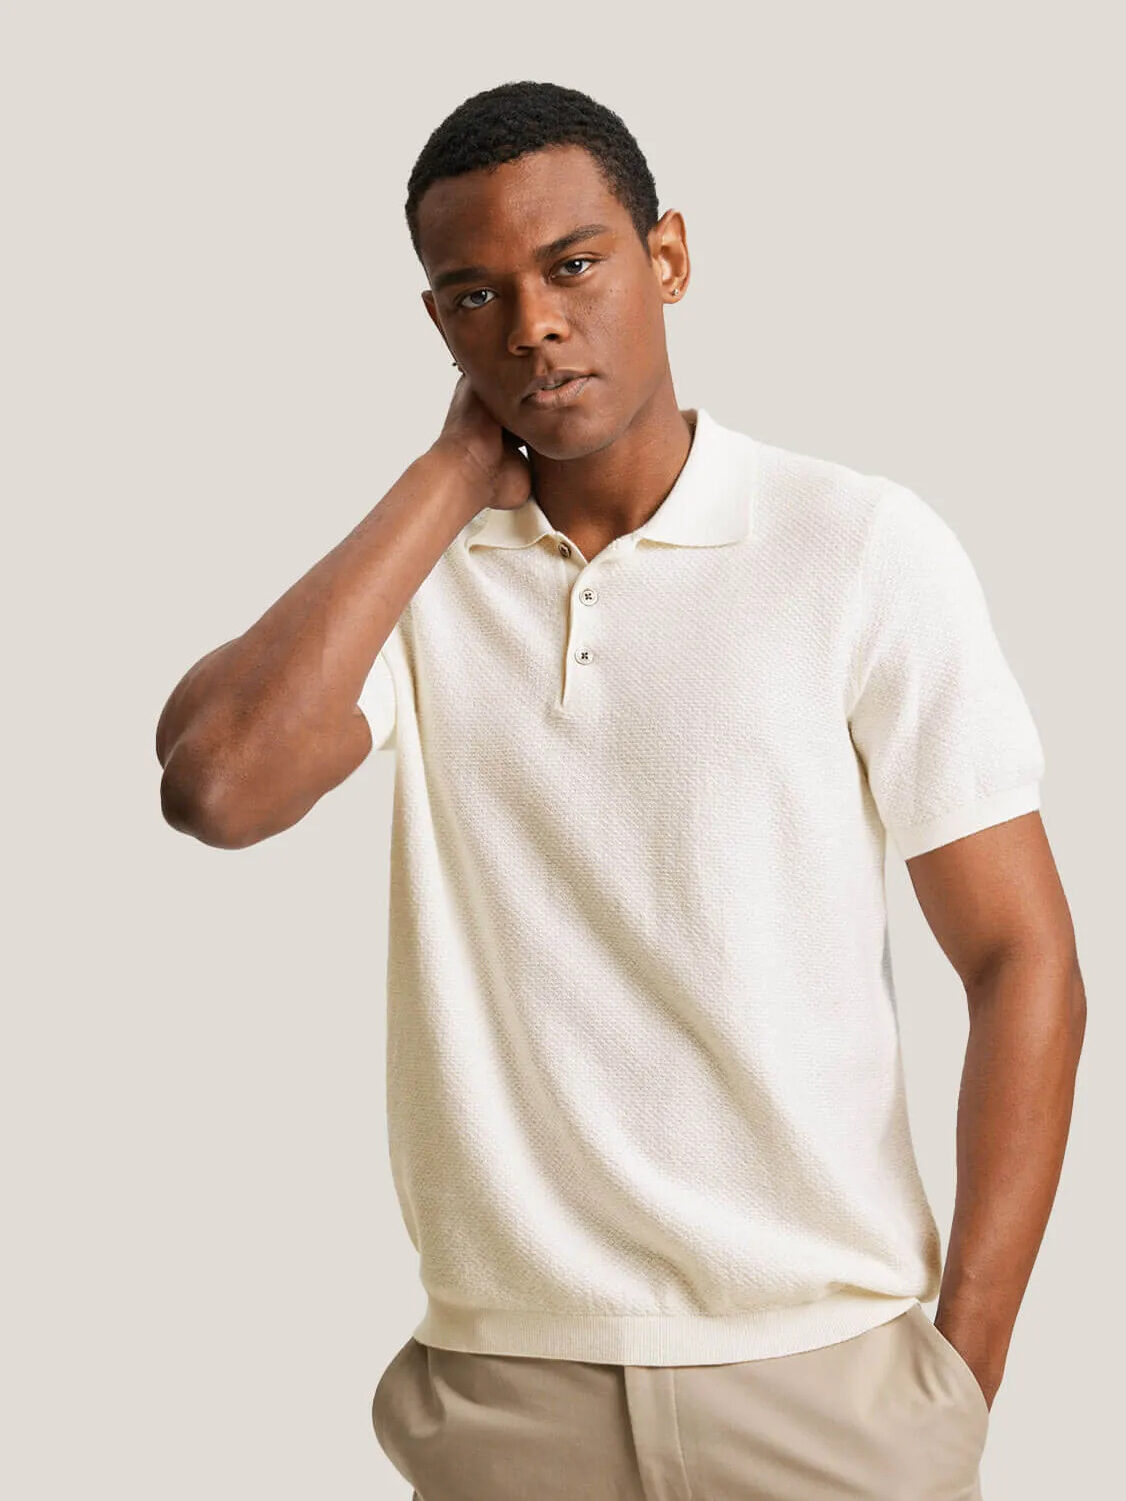 A model wearing a cream cashmere polo from Gentle Herd.